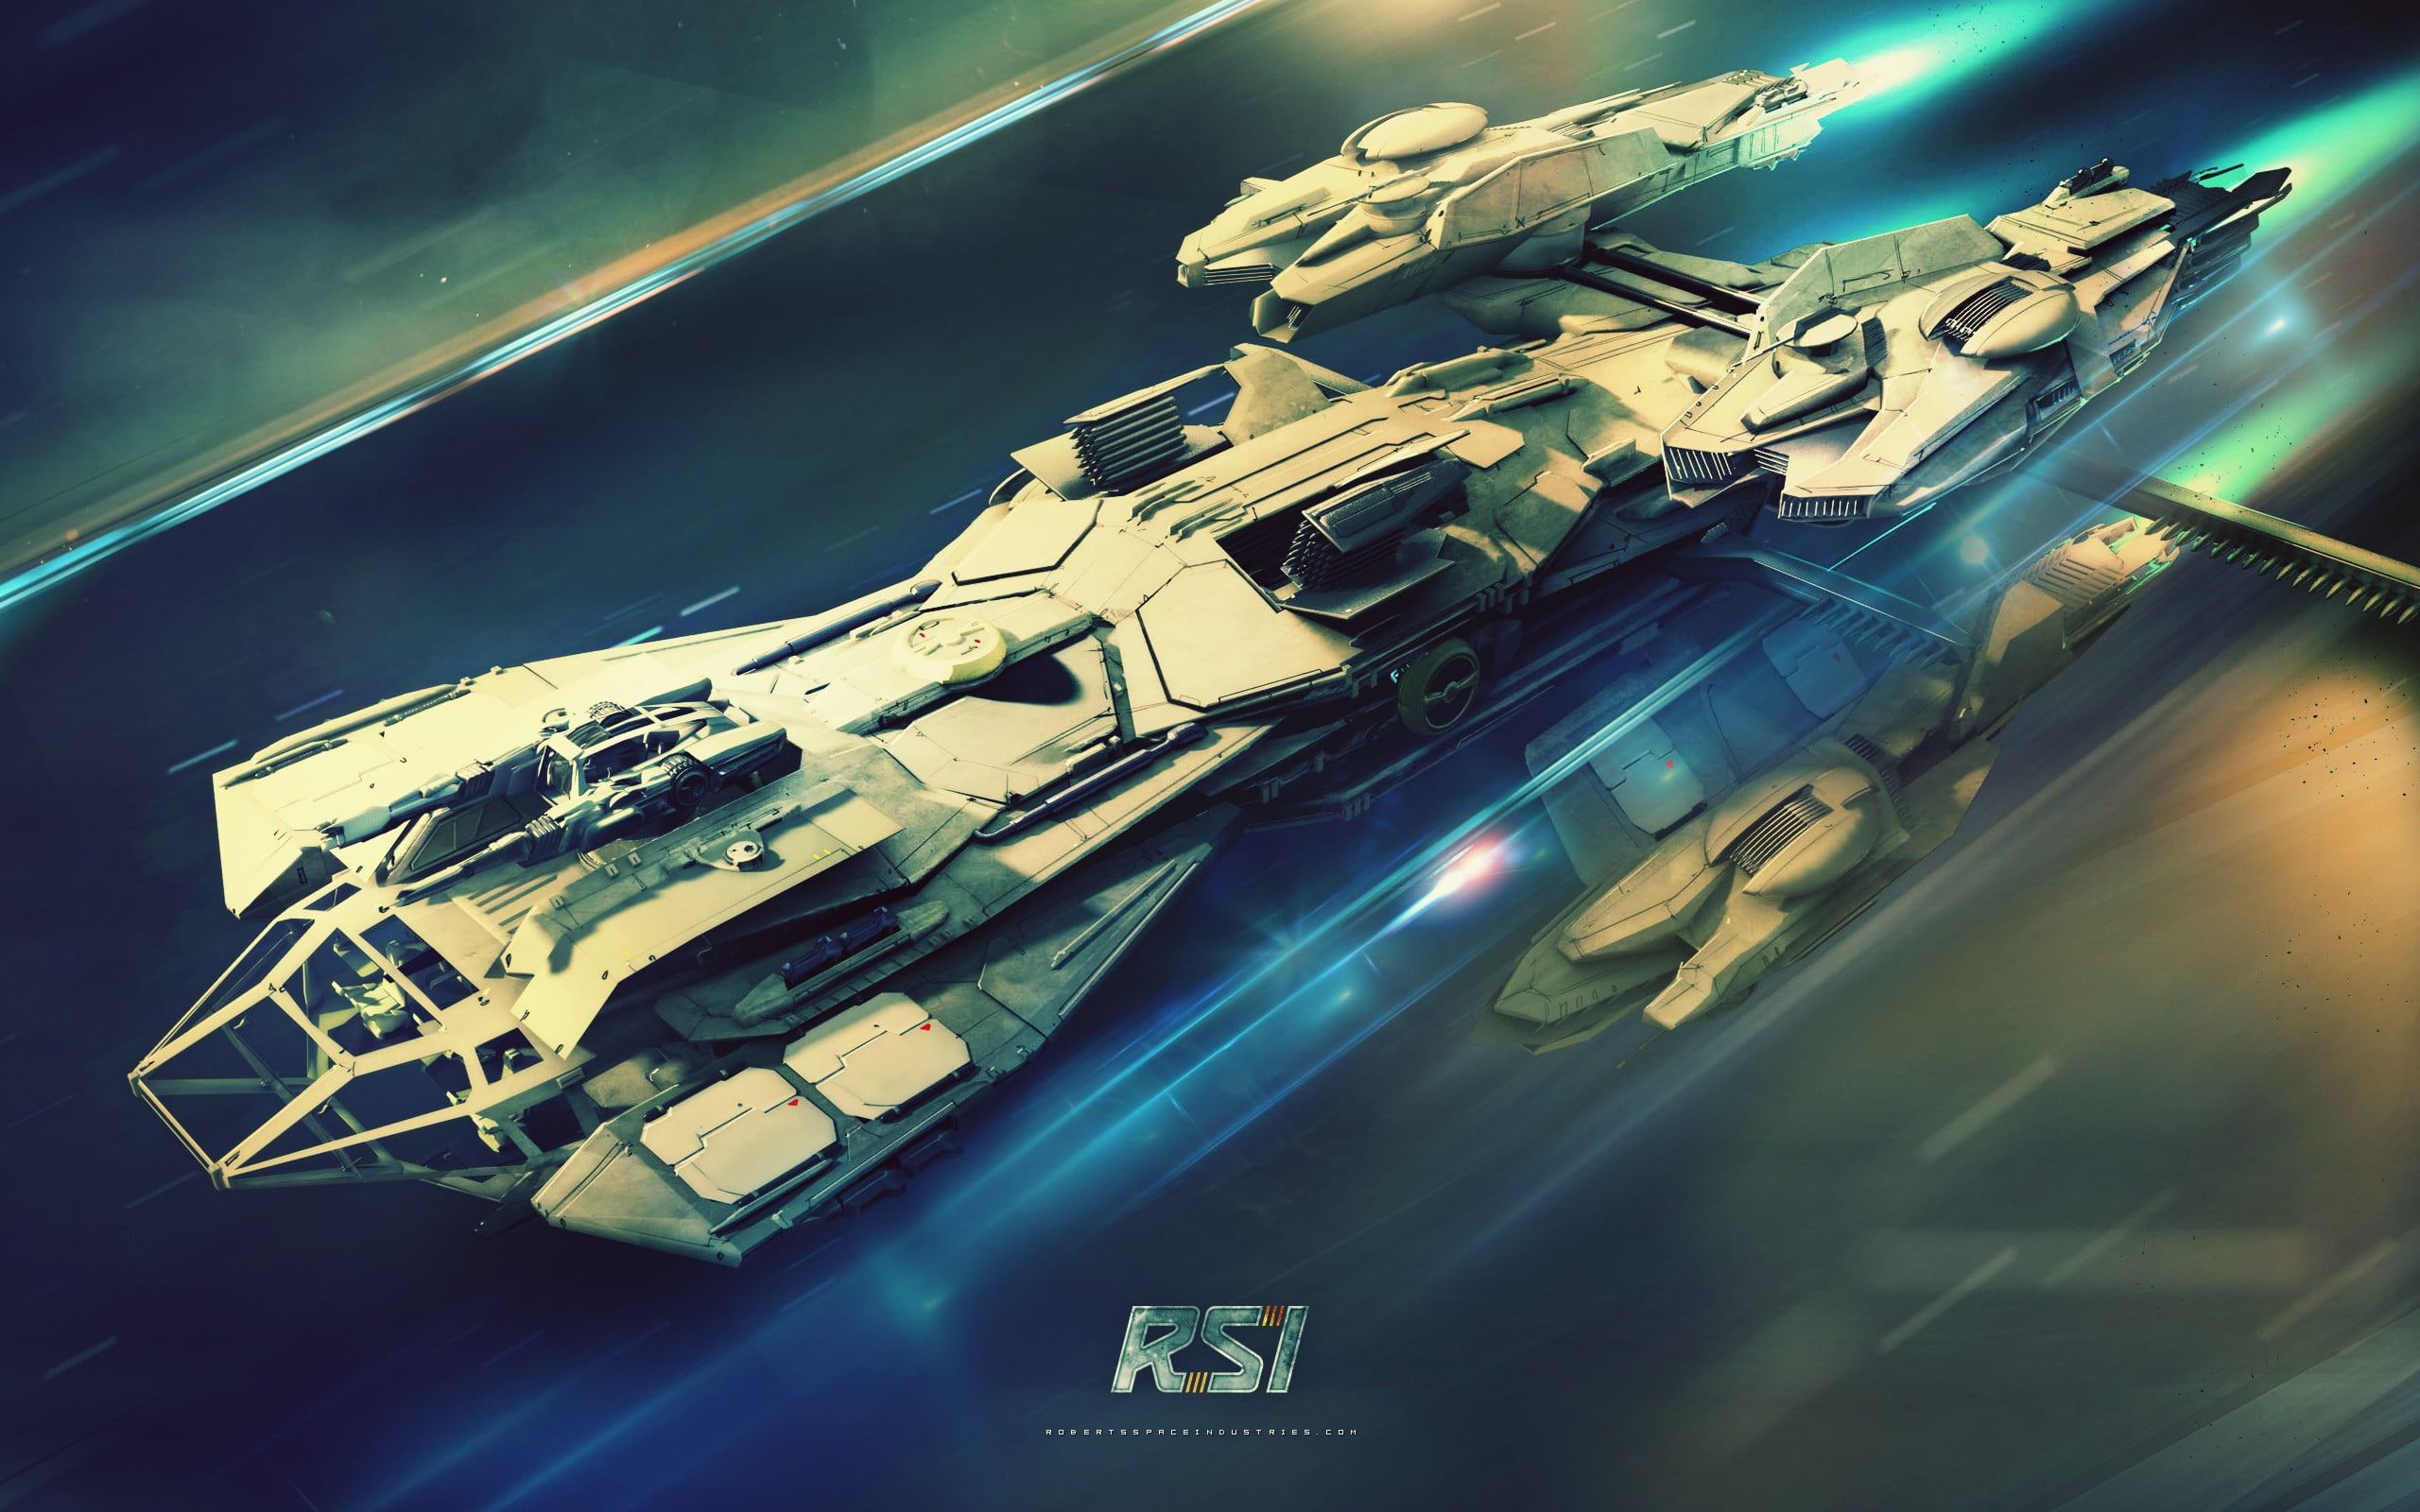 RSI jet 3D wallpaper, spaceship, video games, science fiction